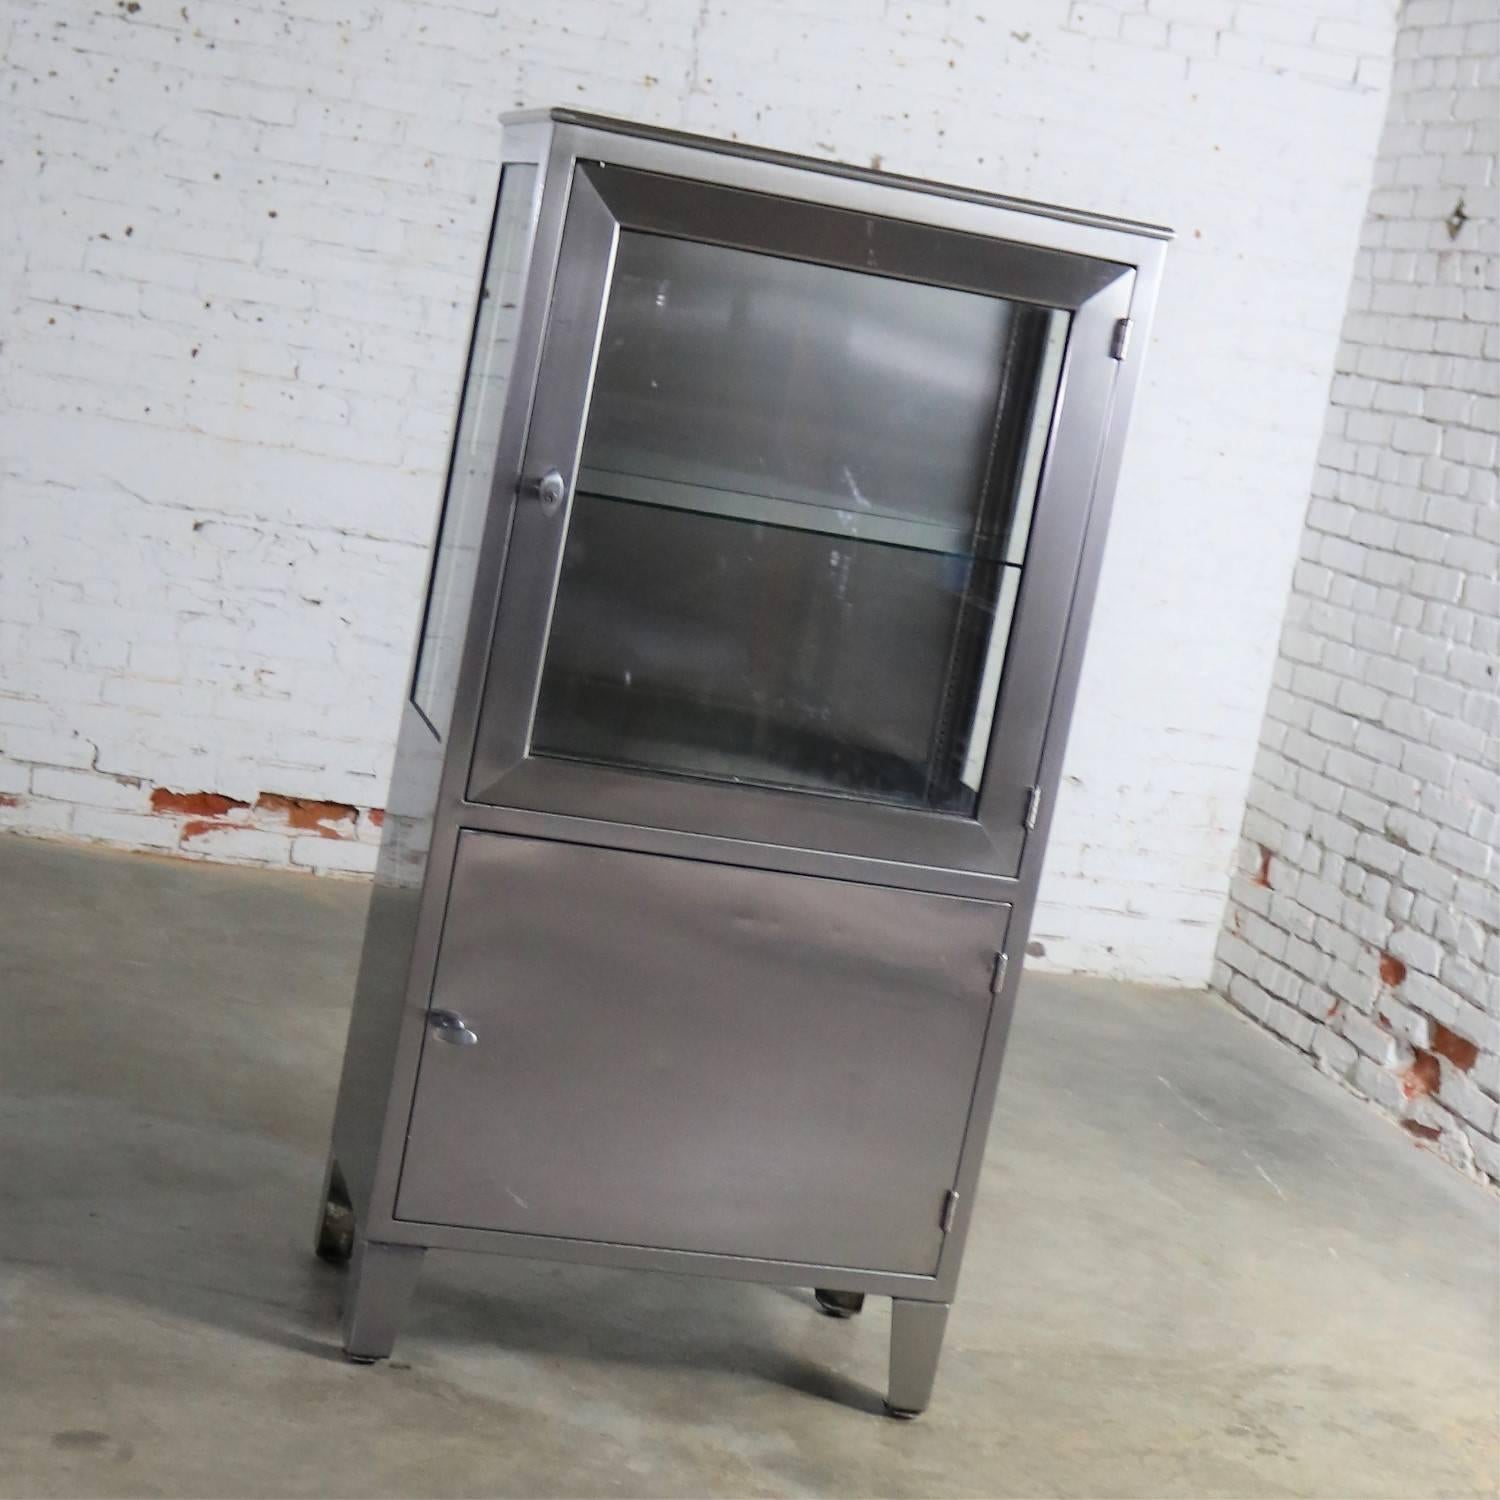 Fabulous stainless steel industrial medical cabinet that is perfect for display. In great vintage age appropriate condition with small nicks and dings and scratches as you would expect but an over-all incredible look, circa 1950s.

Fabulous!